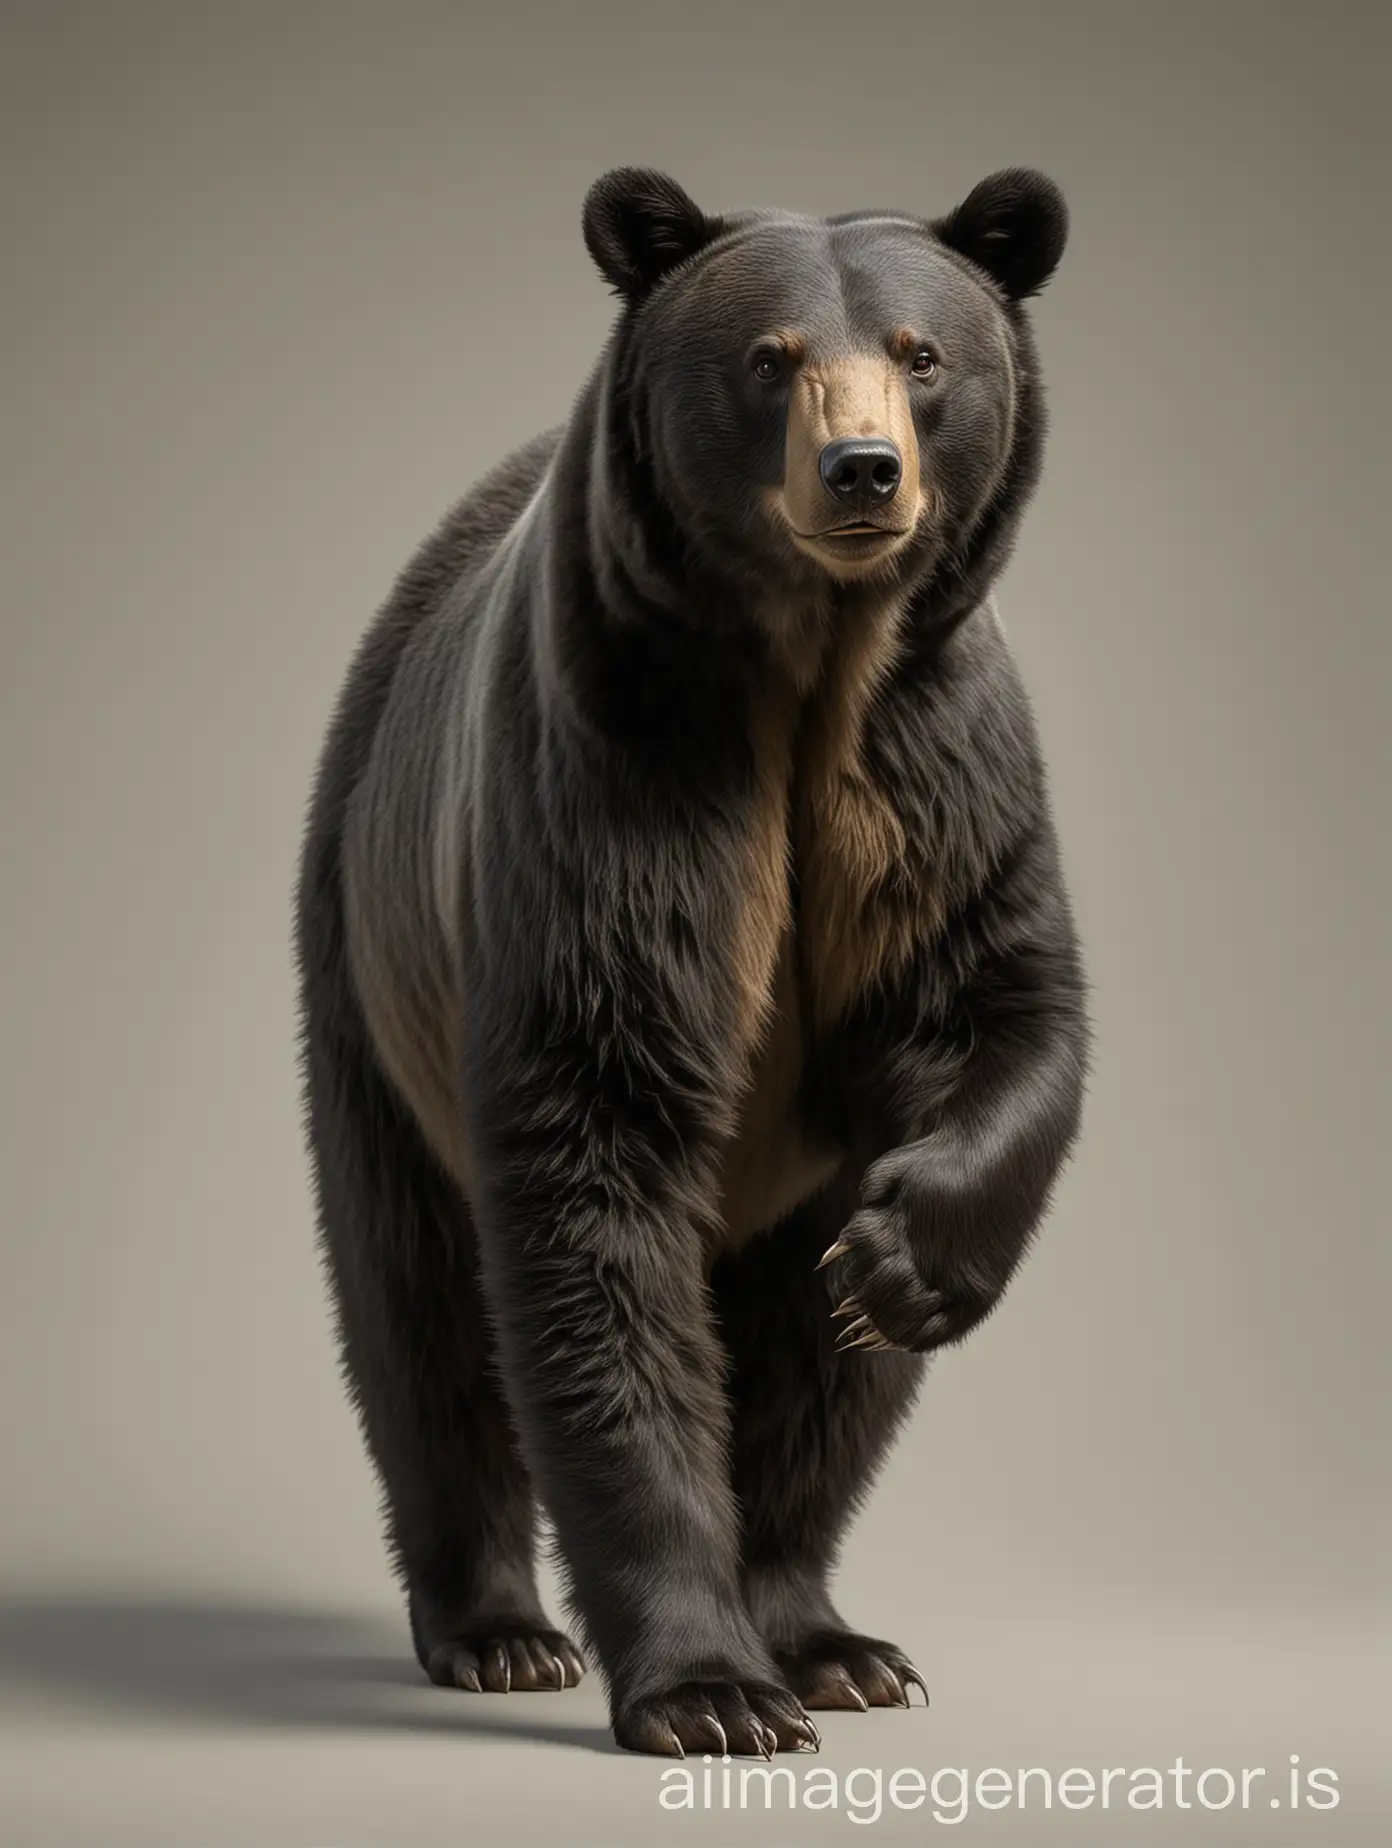 Realistic-Black-Bear-Standing-Against-Neutral-Background